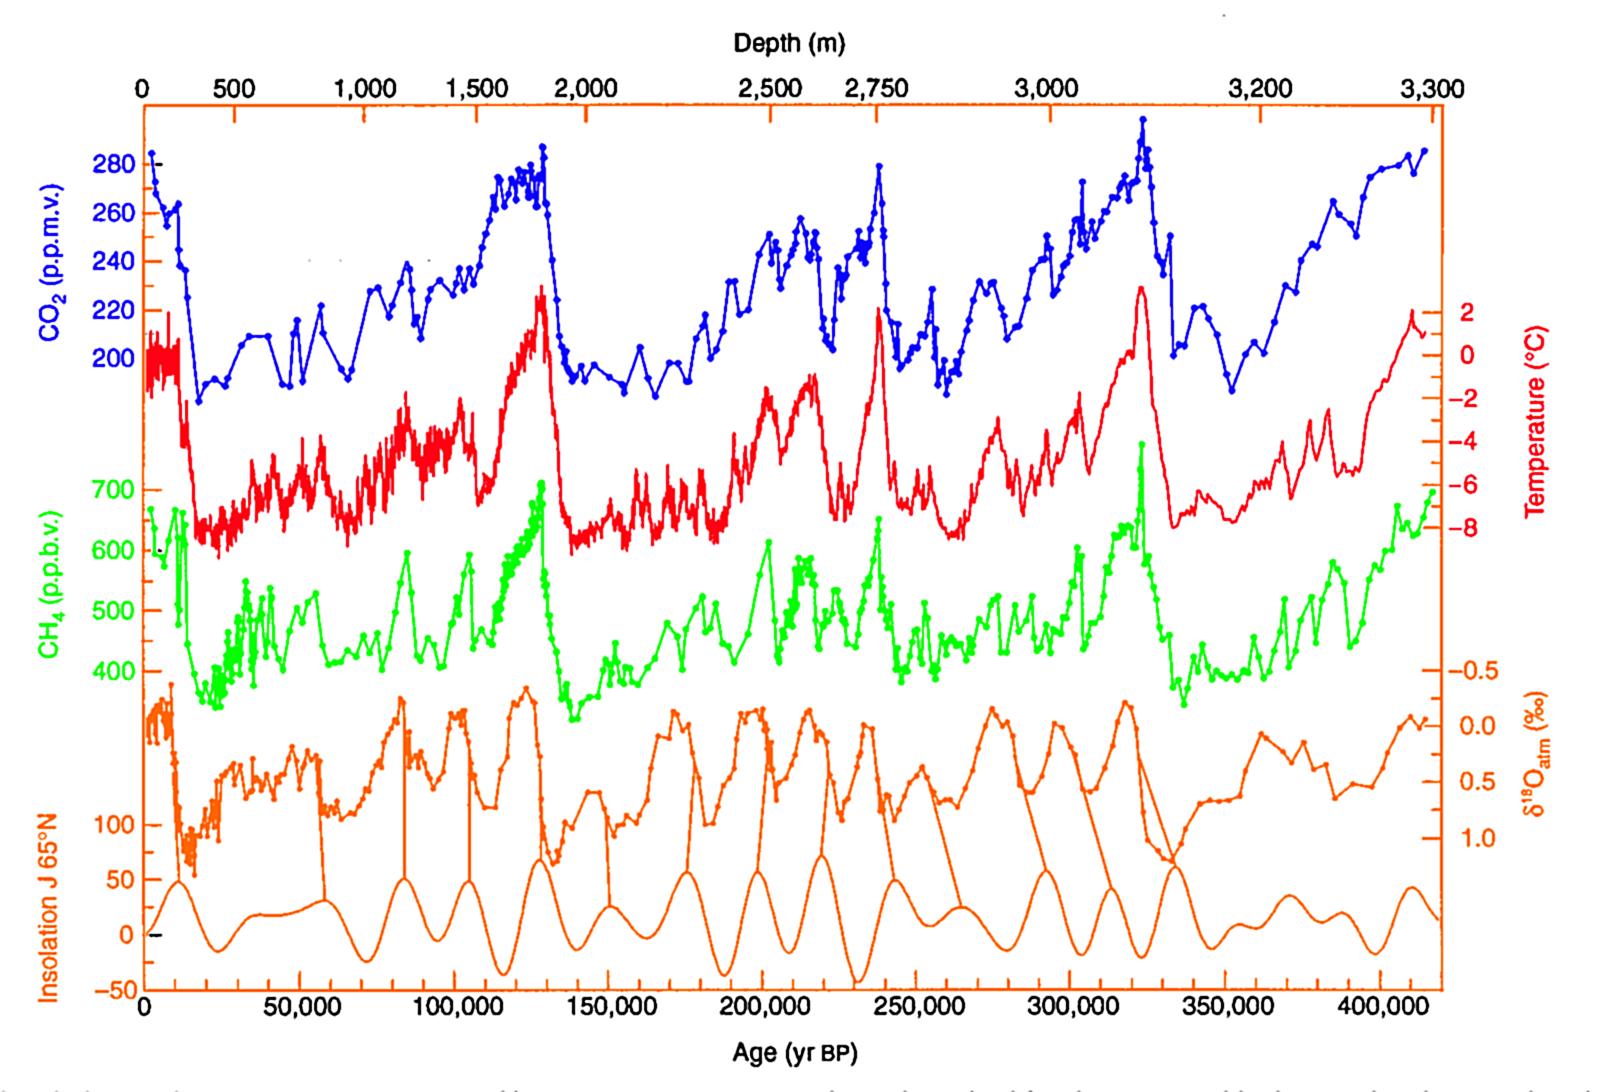 Insolation, methane, and carbon dioxide data extracted from the Vostok ice core, Antarctica. This ice core records in detail the last four glacial/interglacial cycles of the Pleistocene and the start of the Holocene Epochs. Note the approximately 100,000 year cyclicity that emerges in the data.